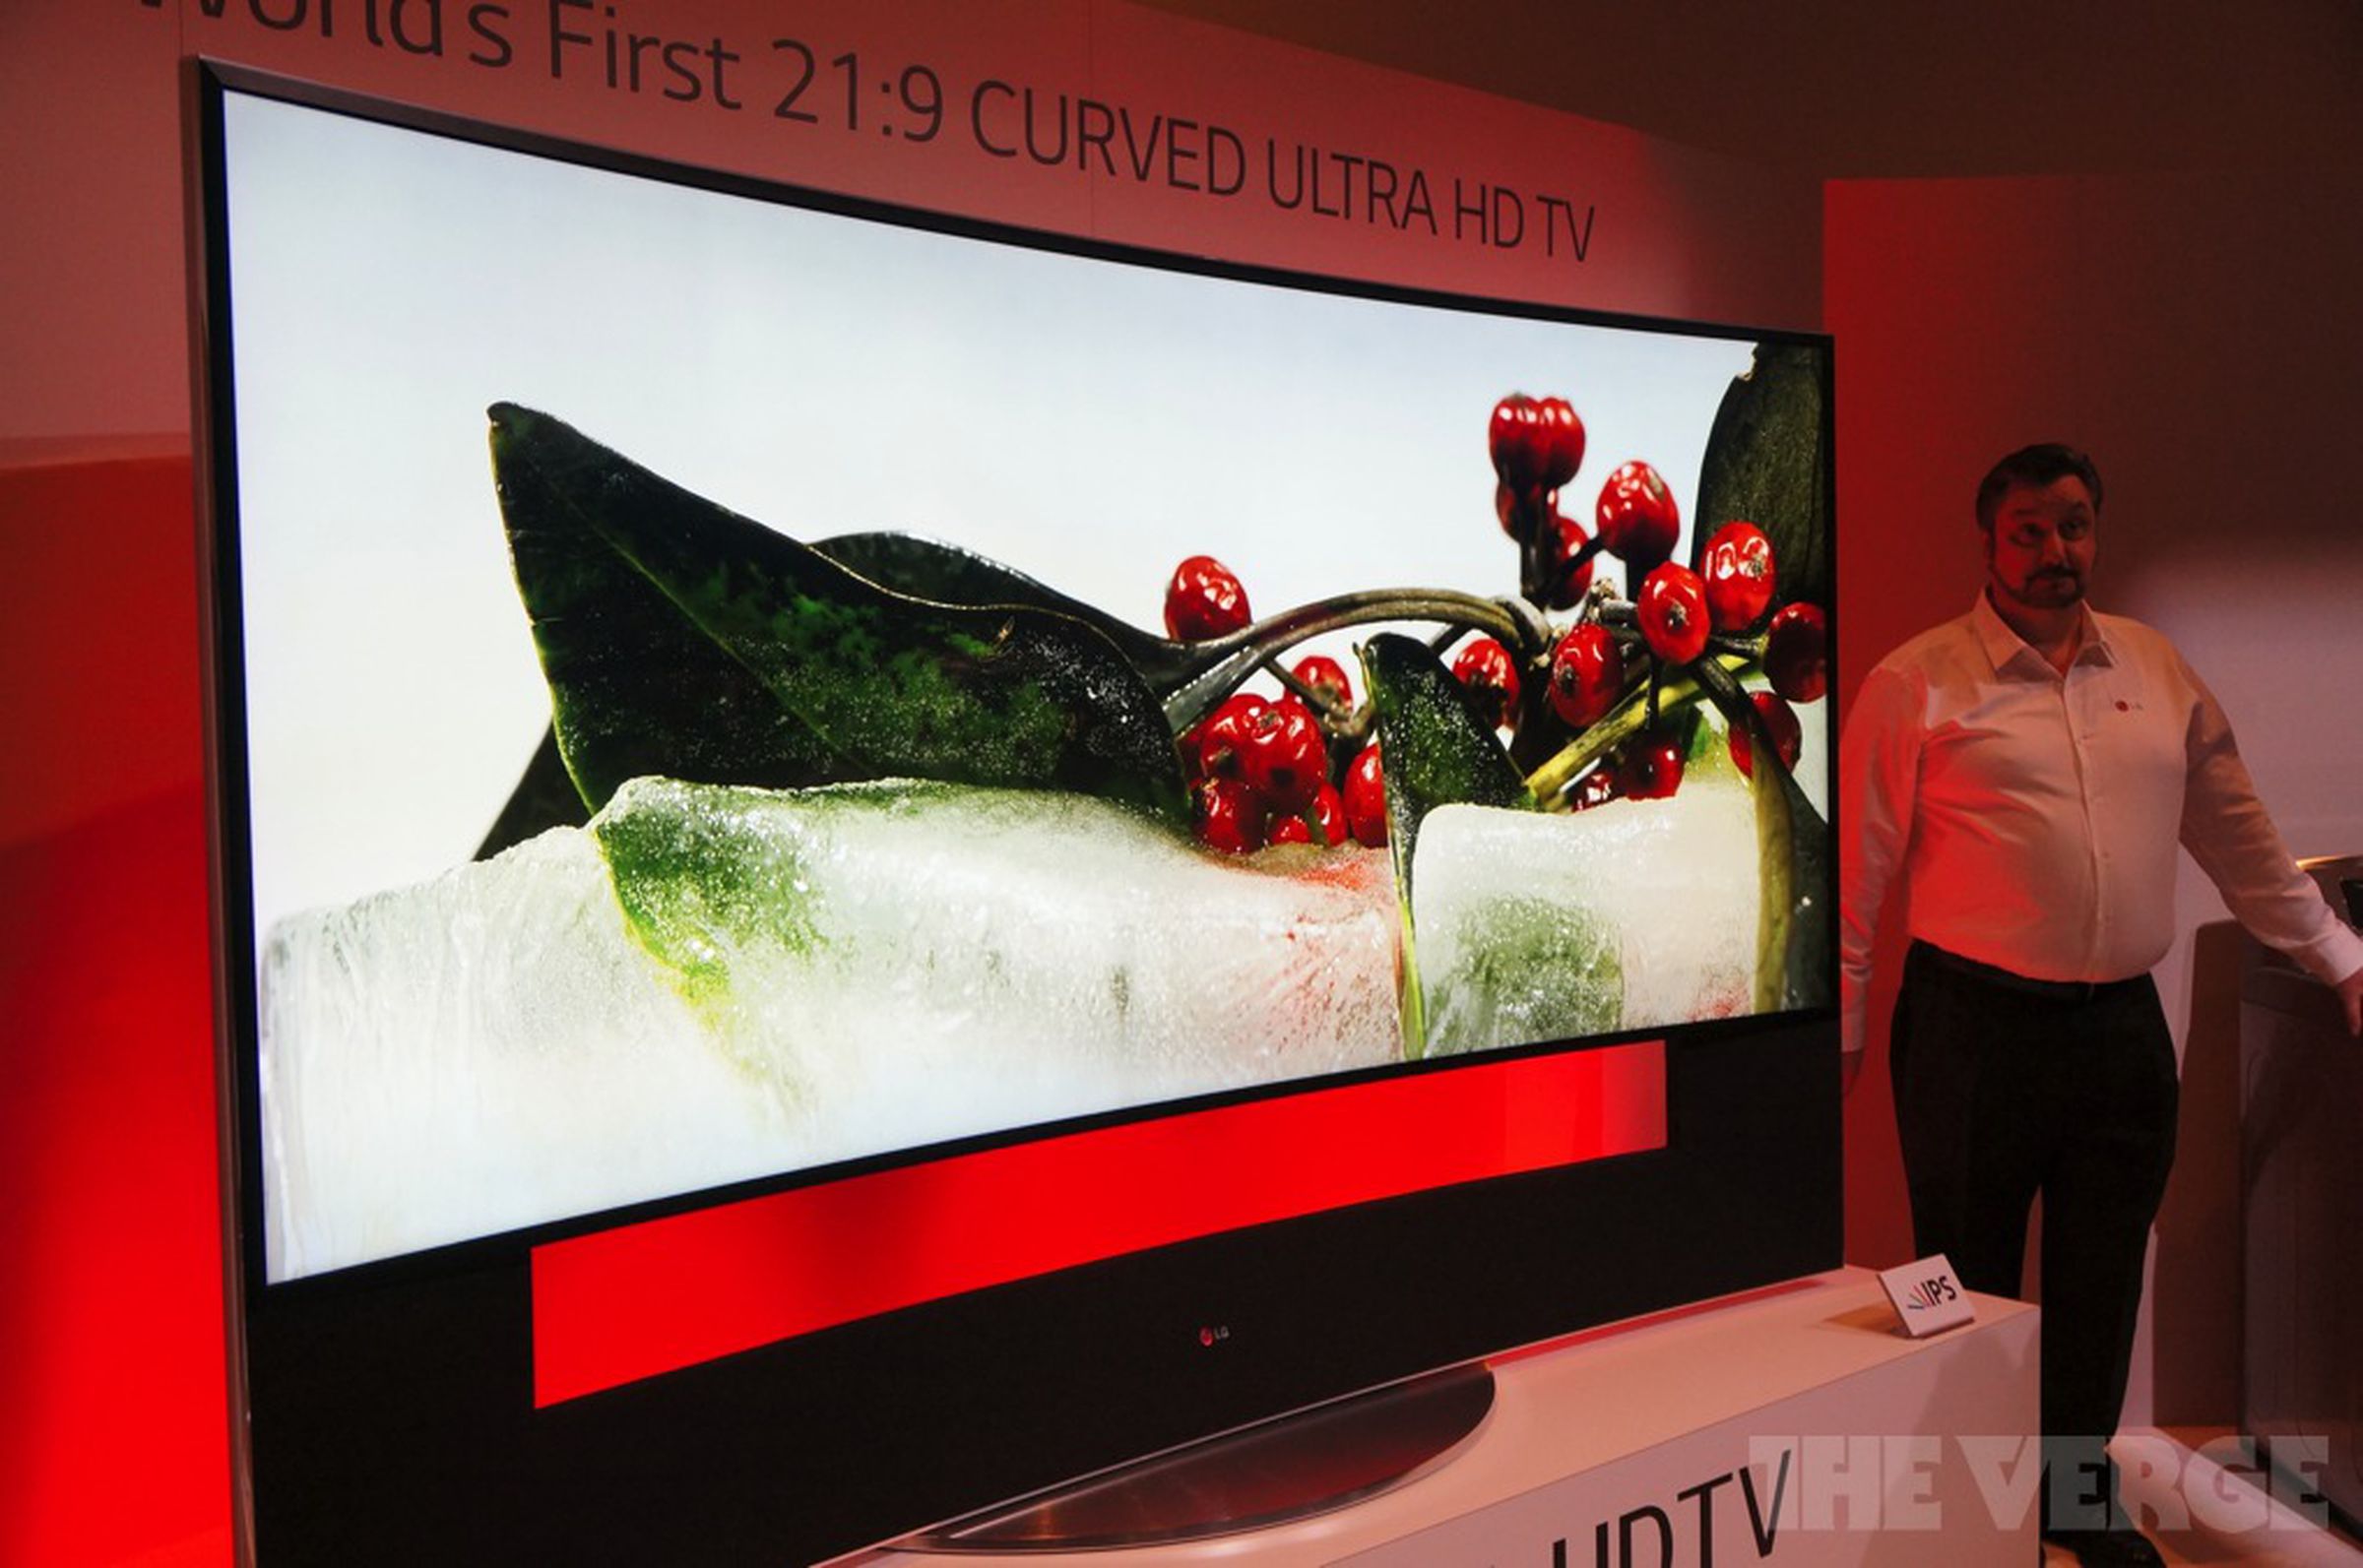 LG's new curved 105-inch UHD TV